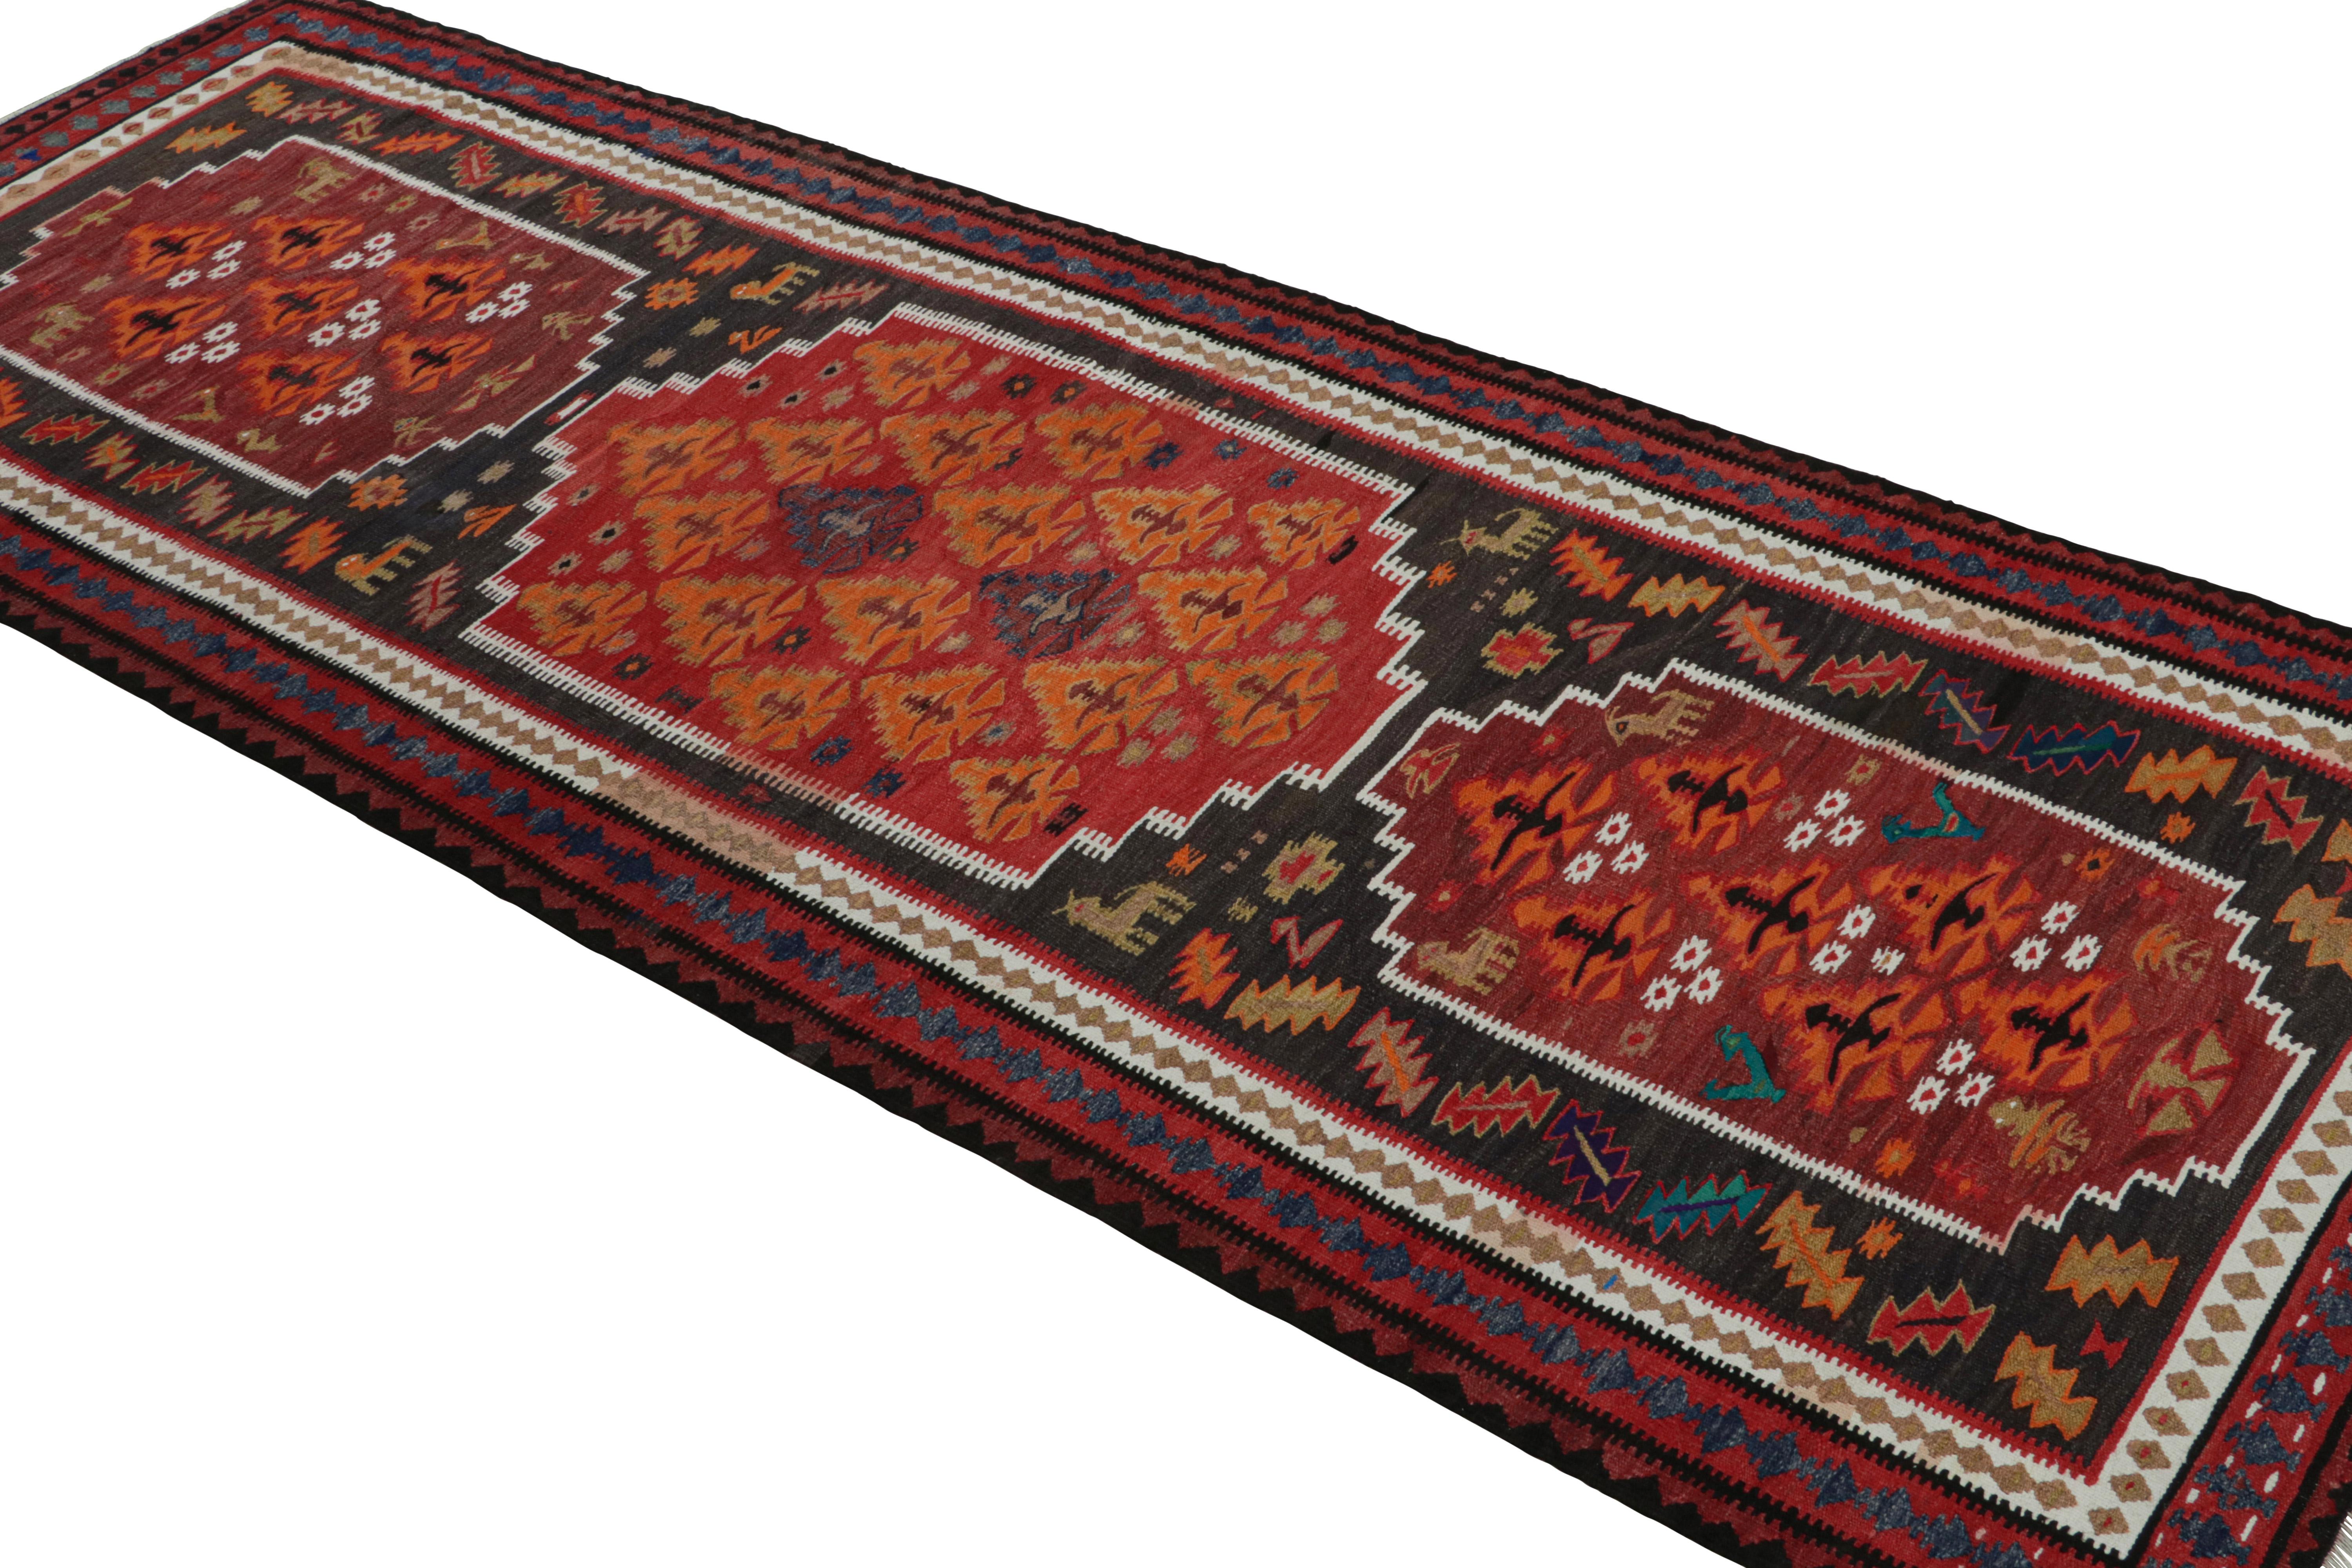 Vintage tribal Persian Kilim runner rug, with Pictorial motifs, from Rug & Kilim
Description: Handwoven in wool, circa 1950-1960, this 3x9 vintage tribal Persian kilim runner rug features a rare design both for its unusual motifs seen in Senneh or